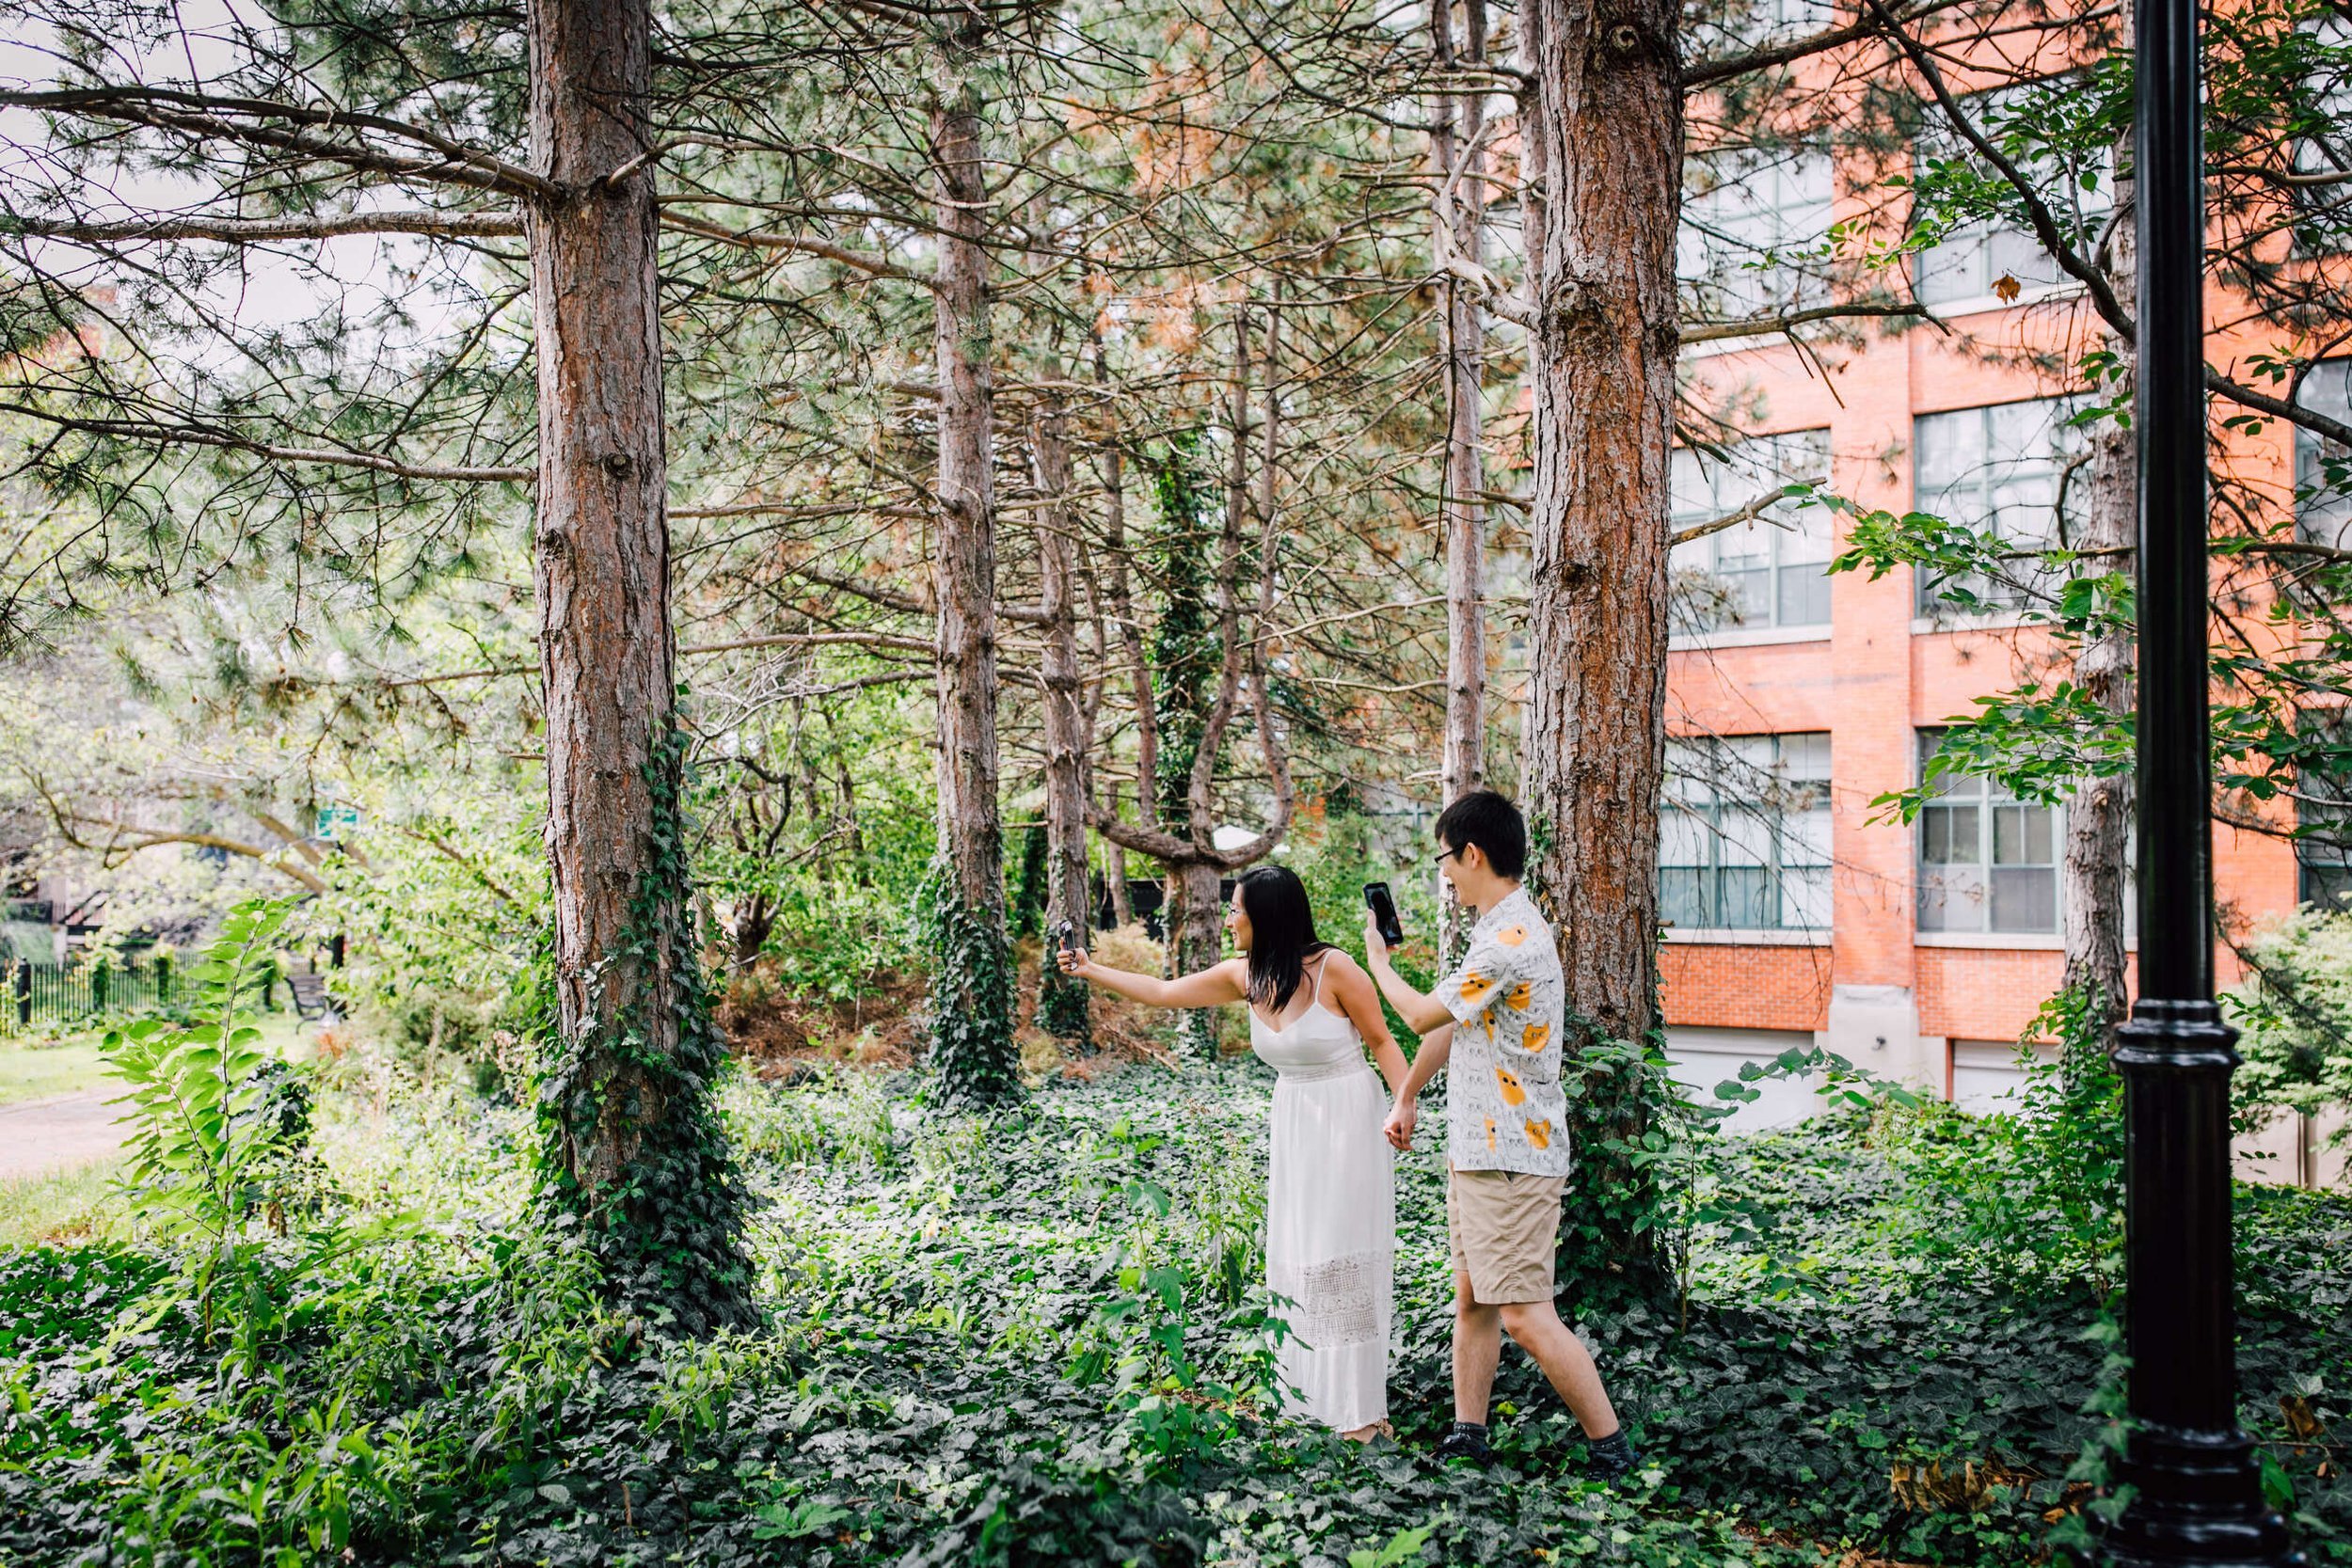  An engaged couple play Pokemon go in the woods, nerdy engagement photos 